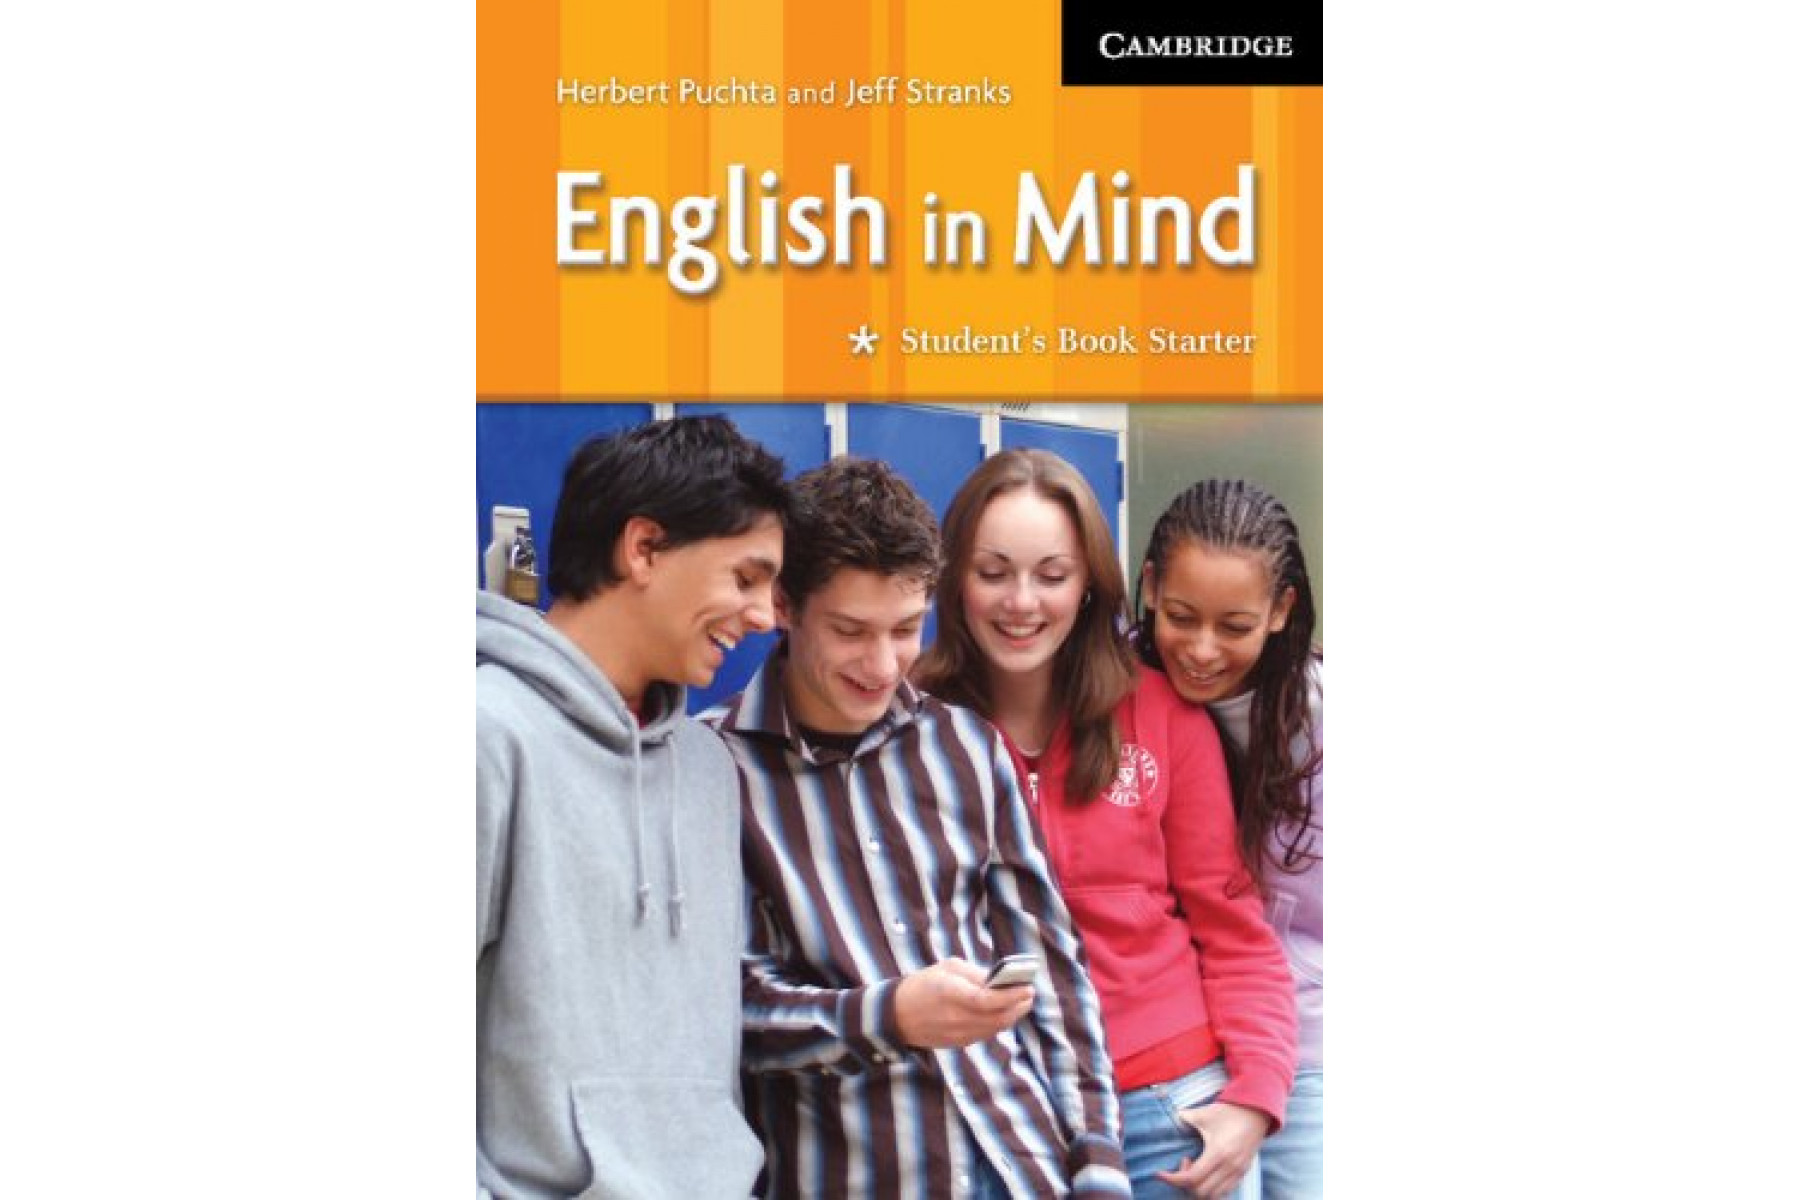 English in Mind Starter Student's Book